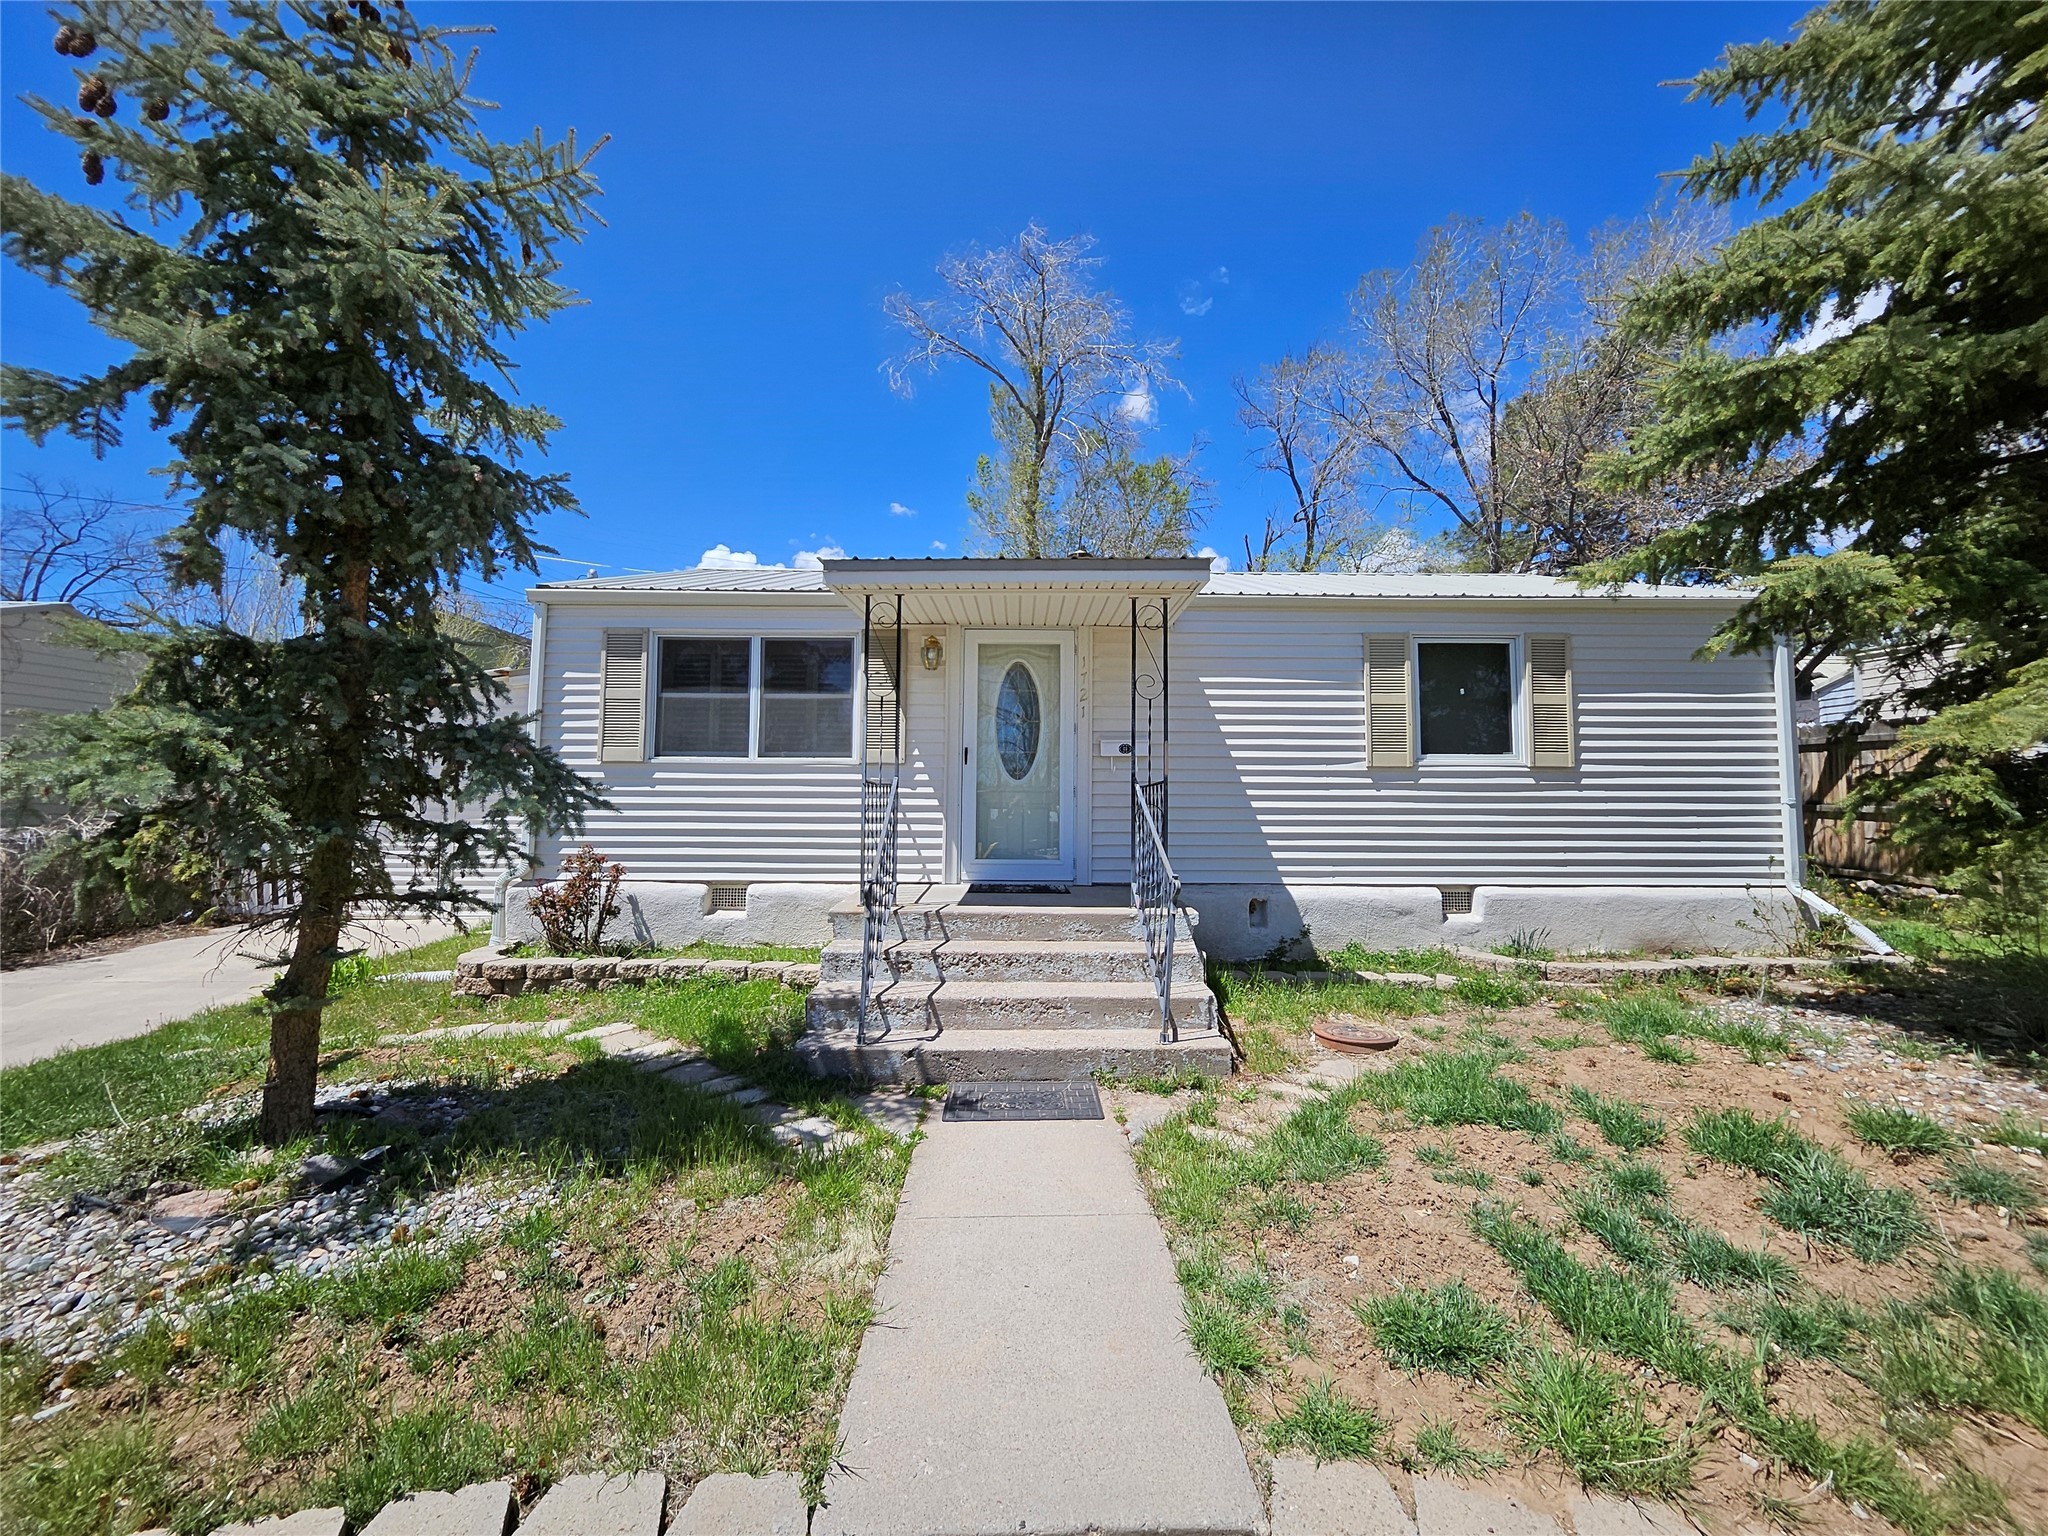 1721 37th, Los Alamos, New Mexico 87544, 2 Bedrooms Bedrooms, ,1 BathroomBathrooms,Residential,For Sale,1721 37th,202401484